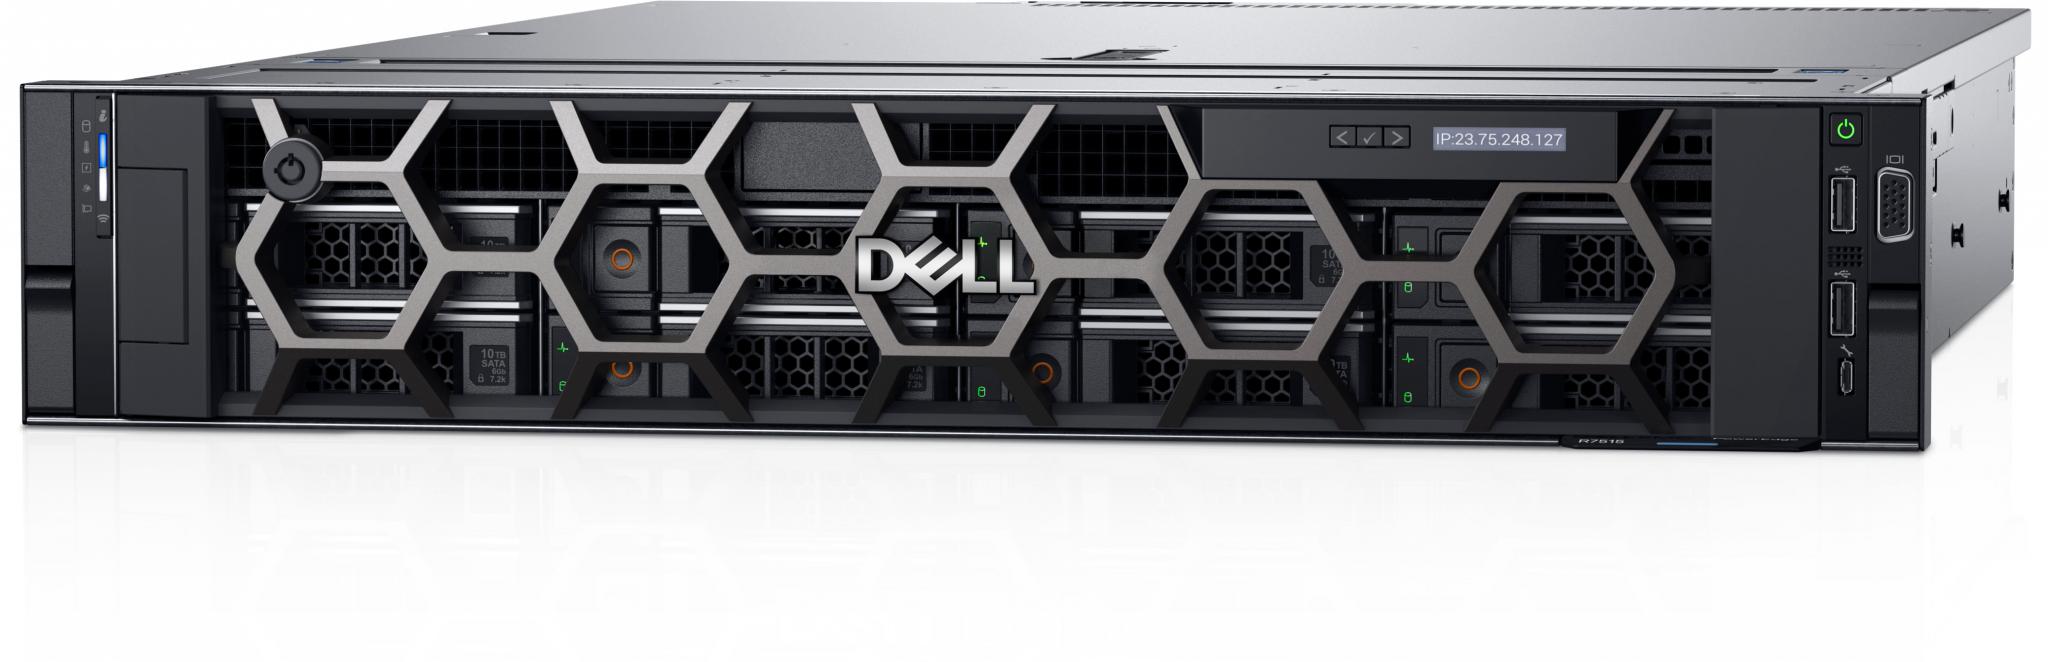 PowerEdge R7515 Rack Server AMD EPYC 7313P 3.0GHz, 16C/32T, 128M Cache (155W) DDR4-3200, 16GB RDIMM, 3200MT/s, Dual Rank, 480GB SSD SATA Read Intensive 6Gbps 512 2.5in Hot-plug AG Drive,3.5in HYB CARR, 3.5" Chassis with up to 12 Hot Plug Hard Drives and 2 x 3.5" Rear Drives, Motherboard, with 2 x